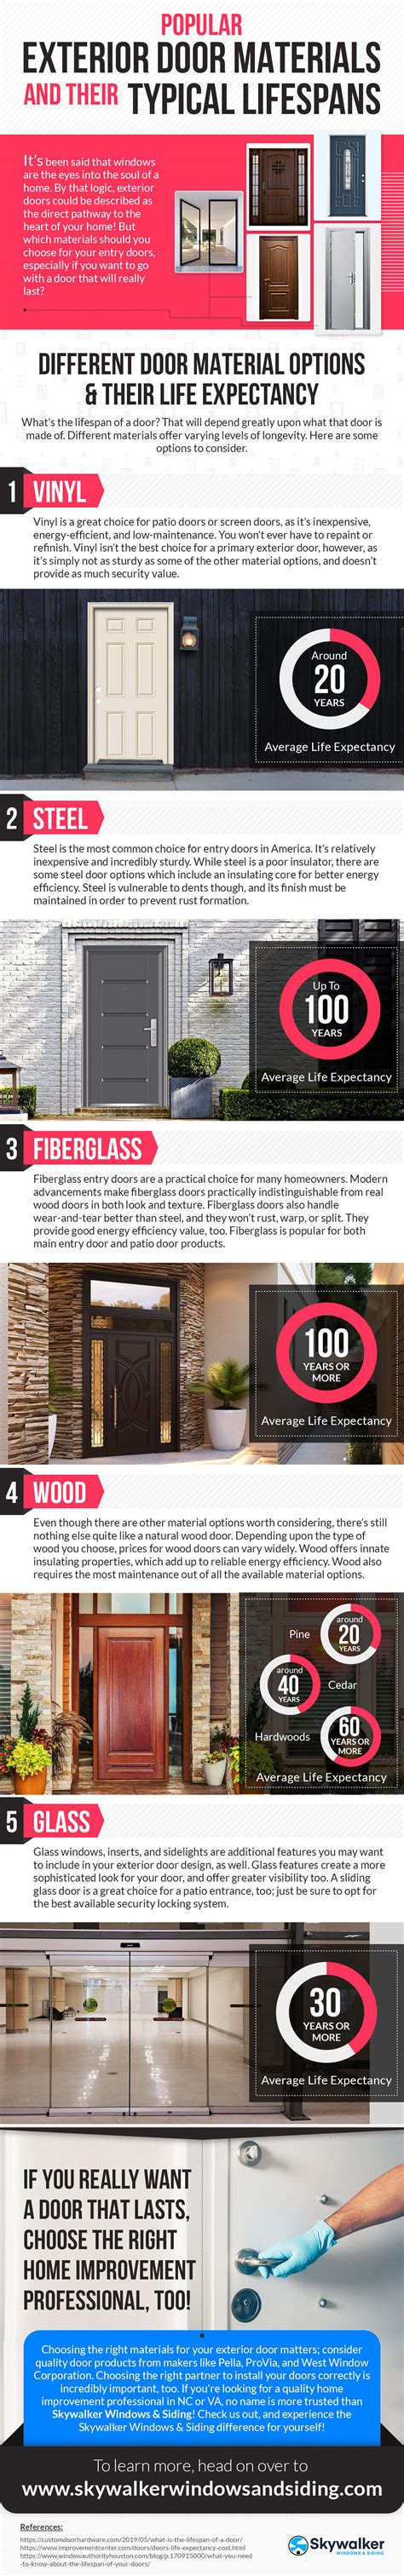 Small Guide On The Popular Exterior Door Materials 2021 Infographic Plaza